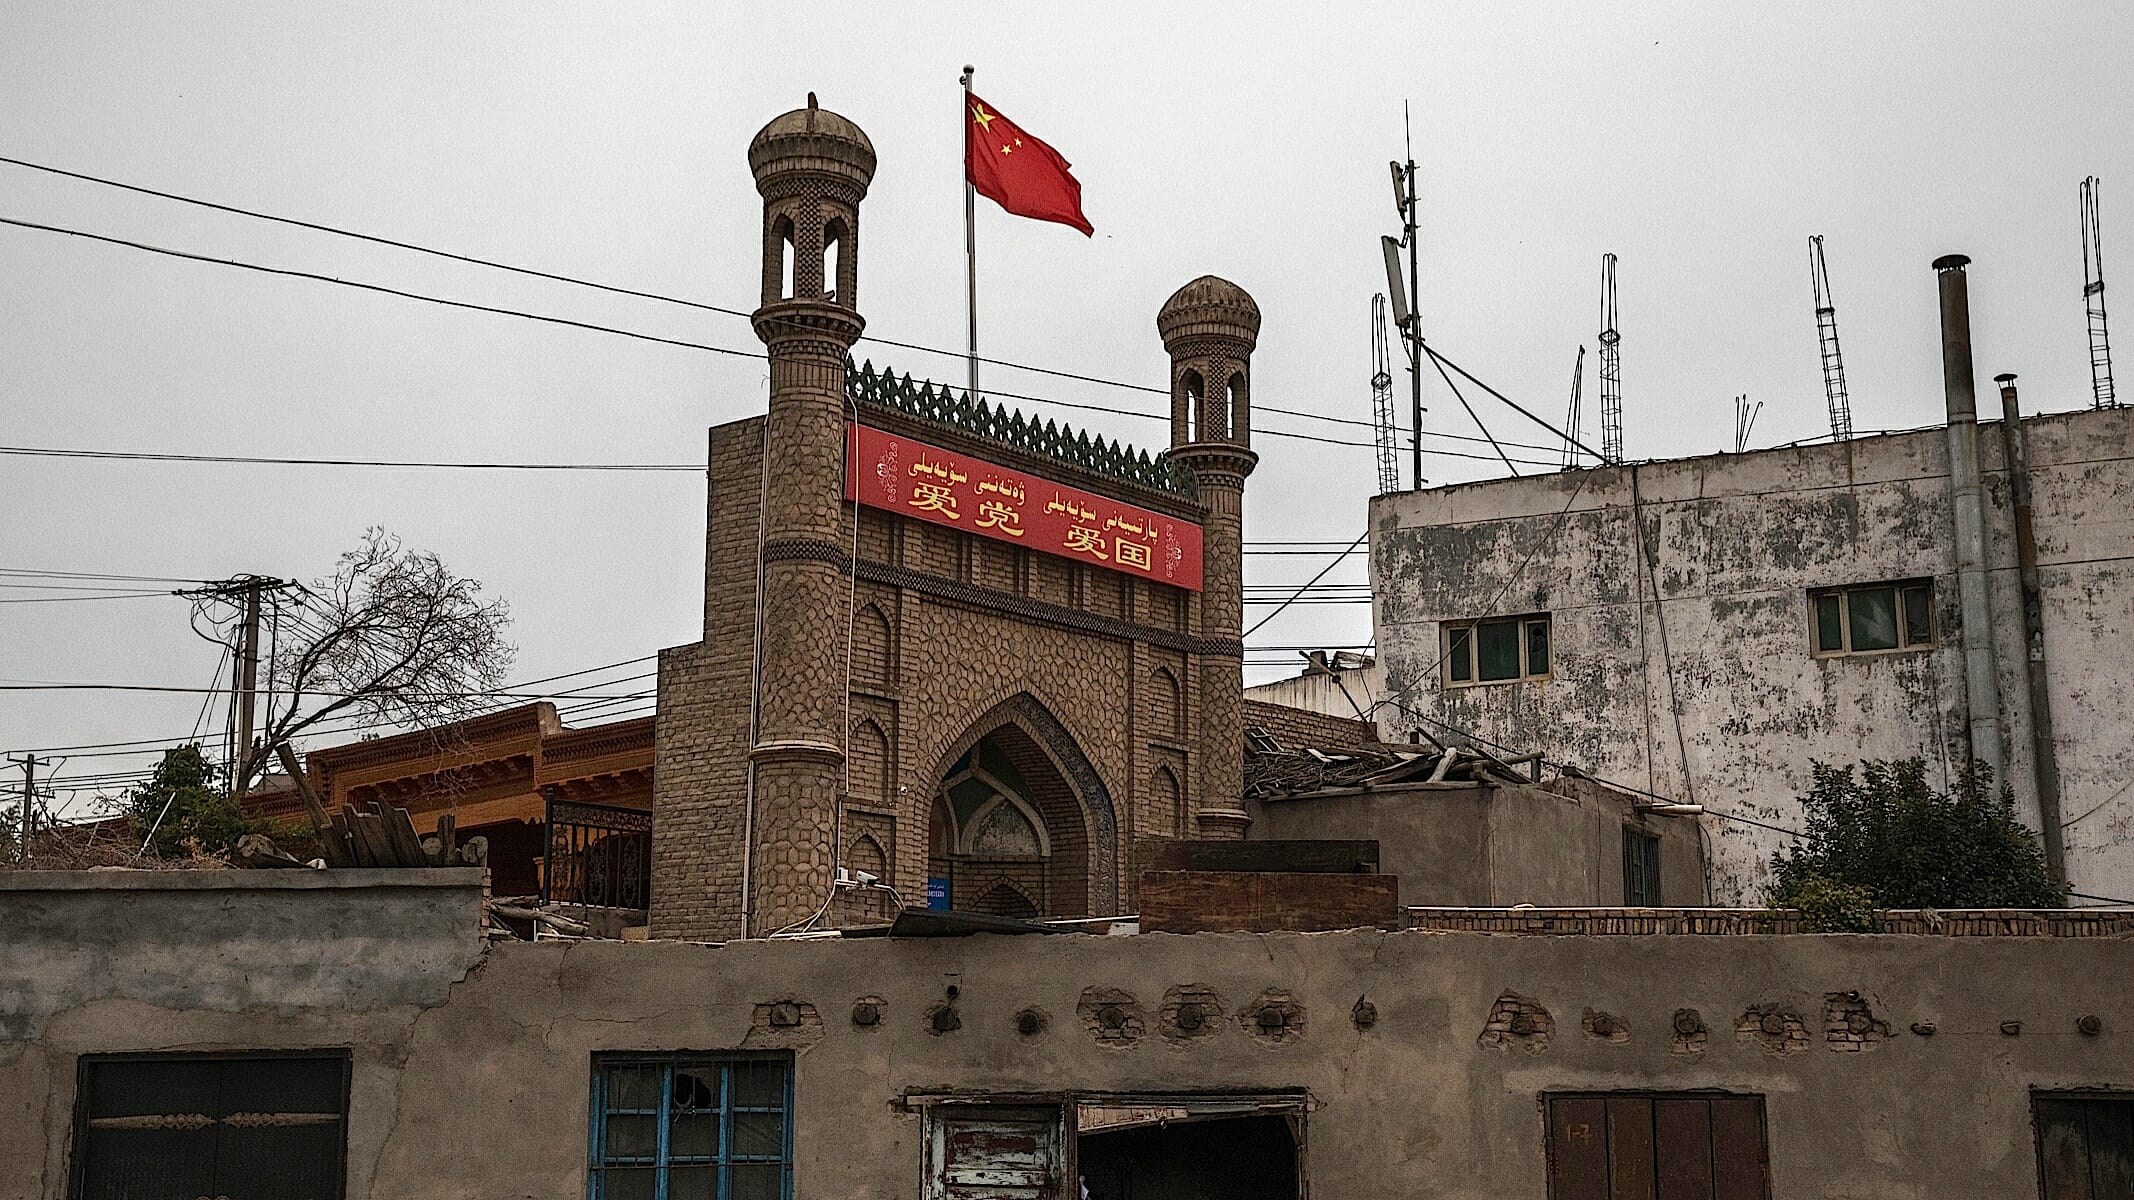 China Has Detained Millions of Muslims in Concentration Camps. What Will The U.S. Do?